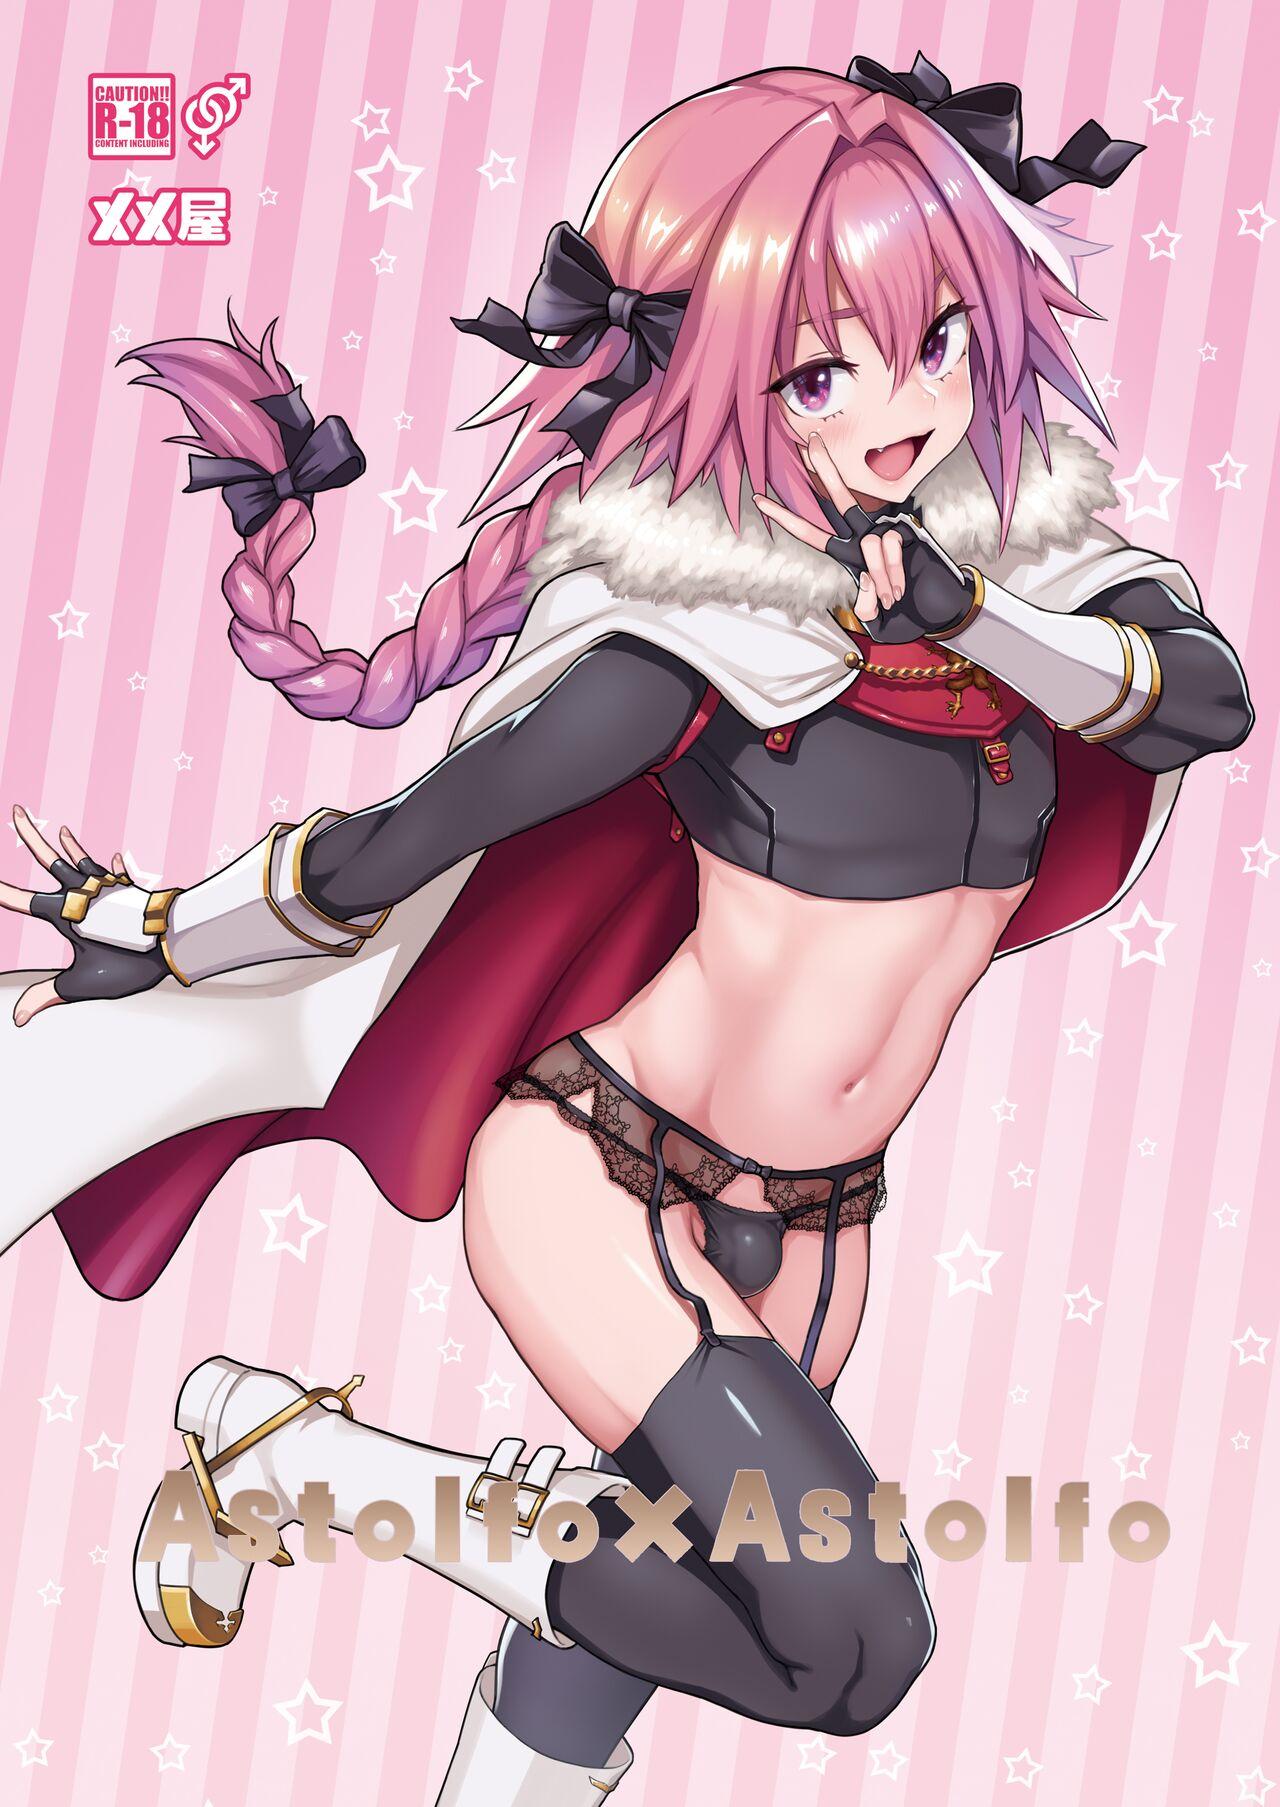 Bigass Astolfo x Astolfo - Fate grand order Female Domination - Page 2